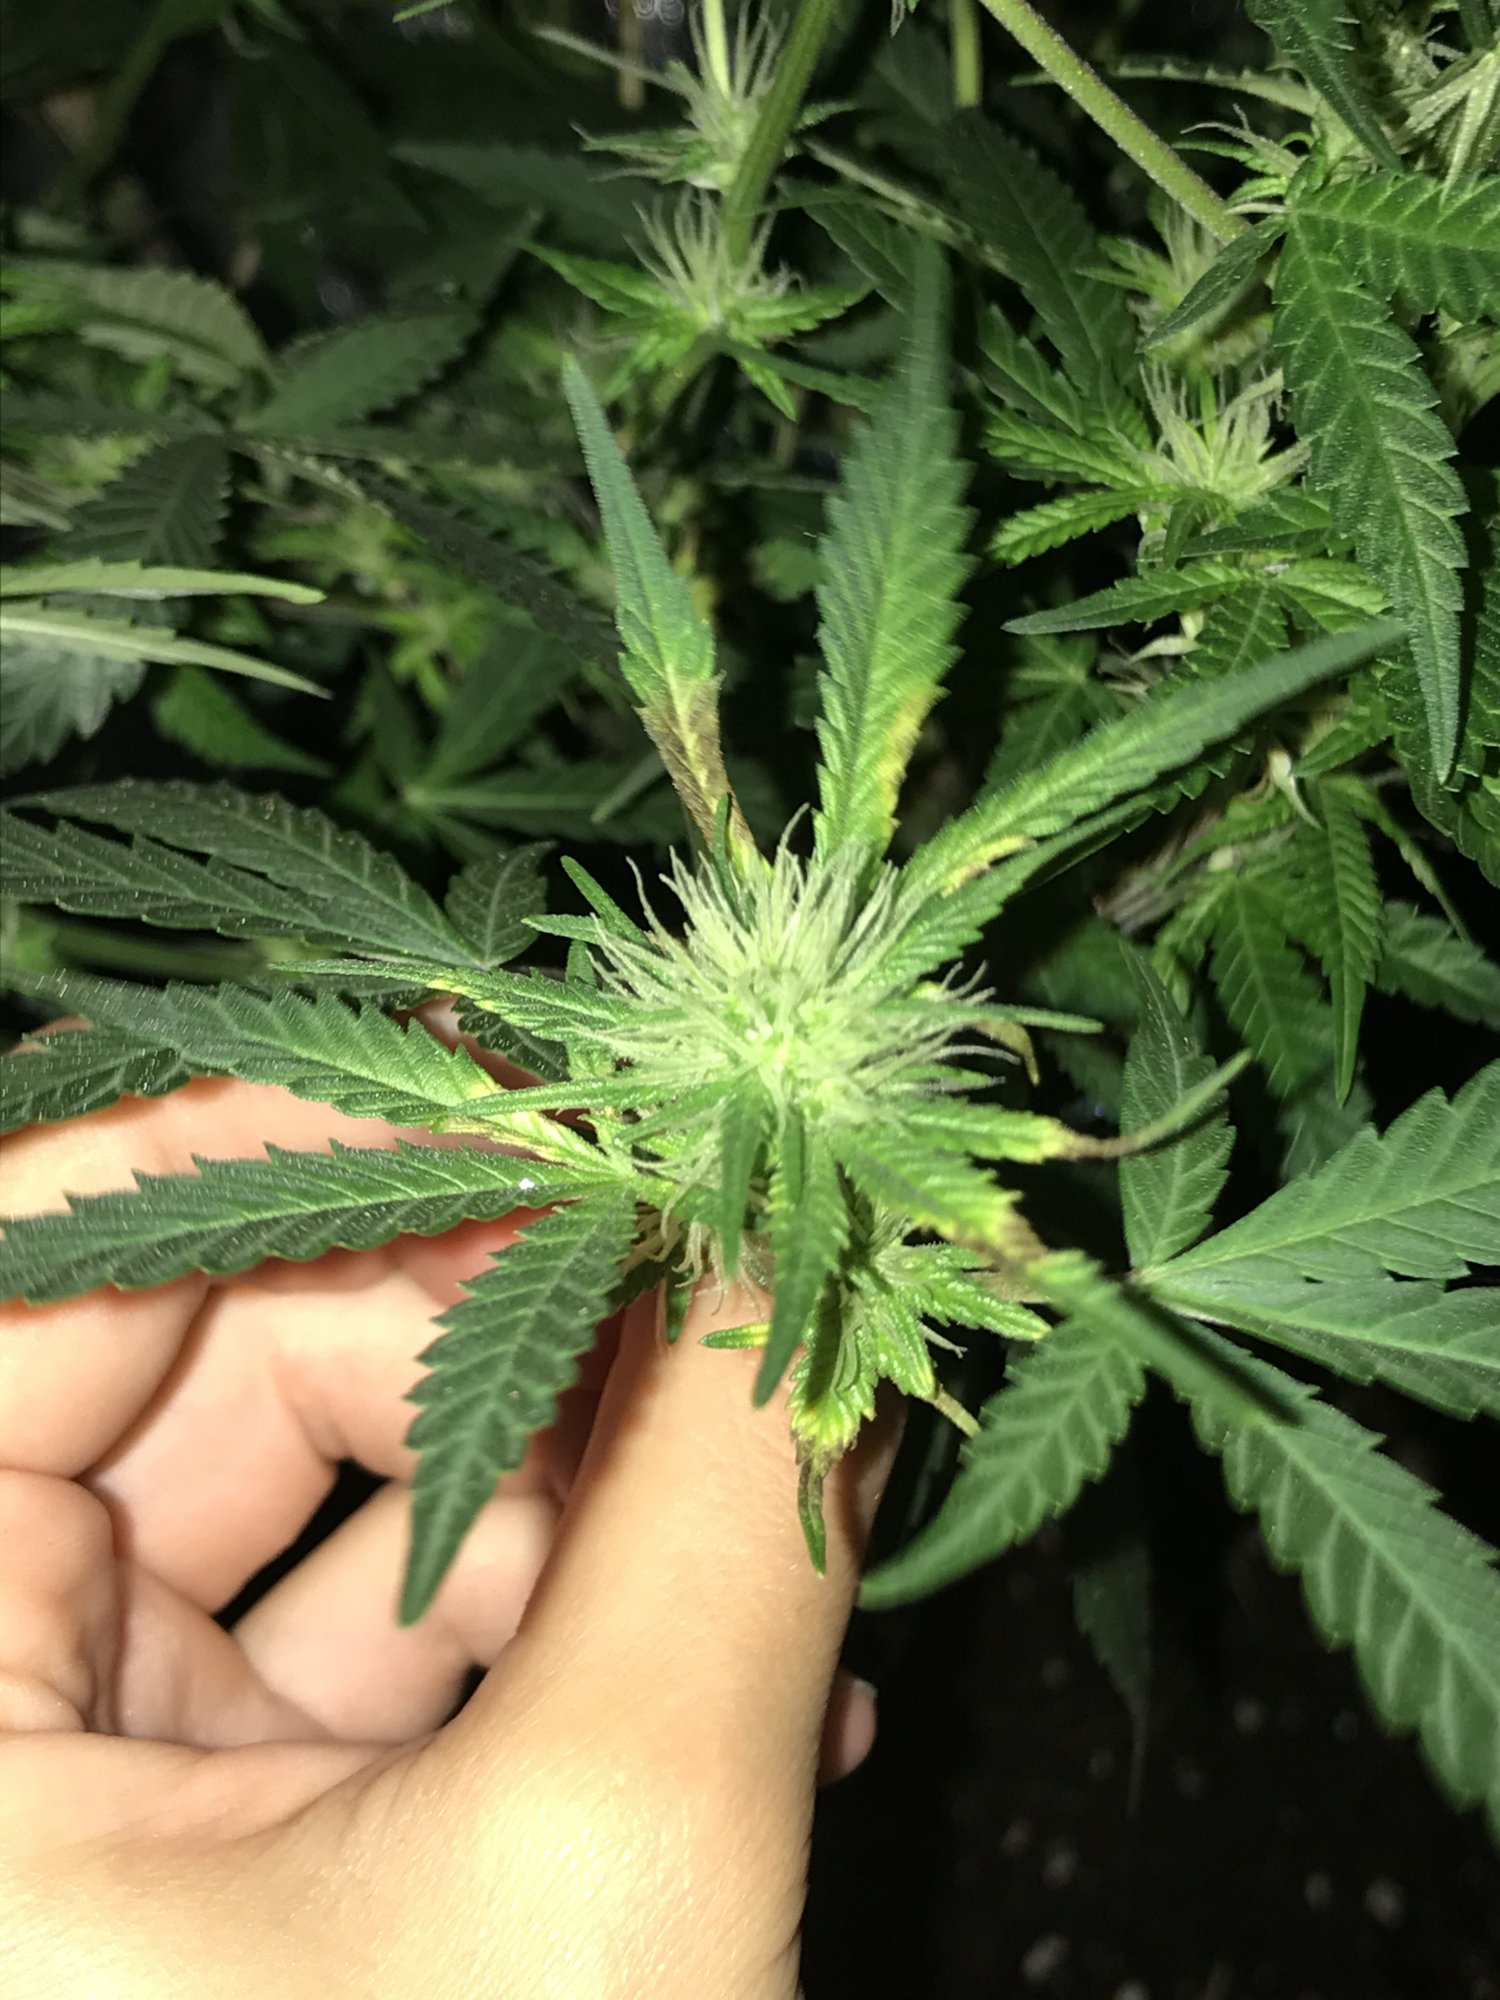 Weird browning on female plant wk3 of flower 3